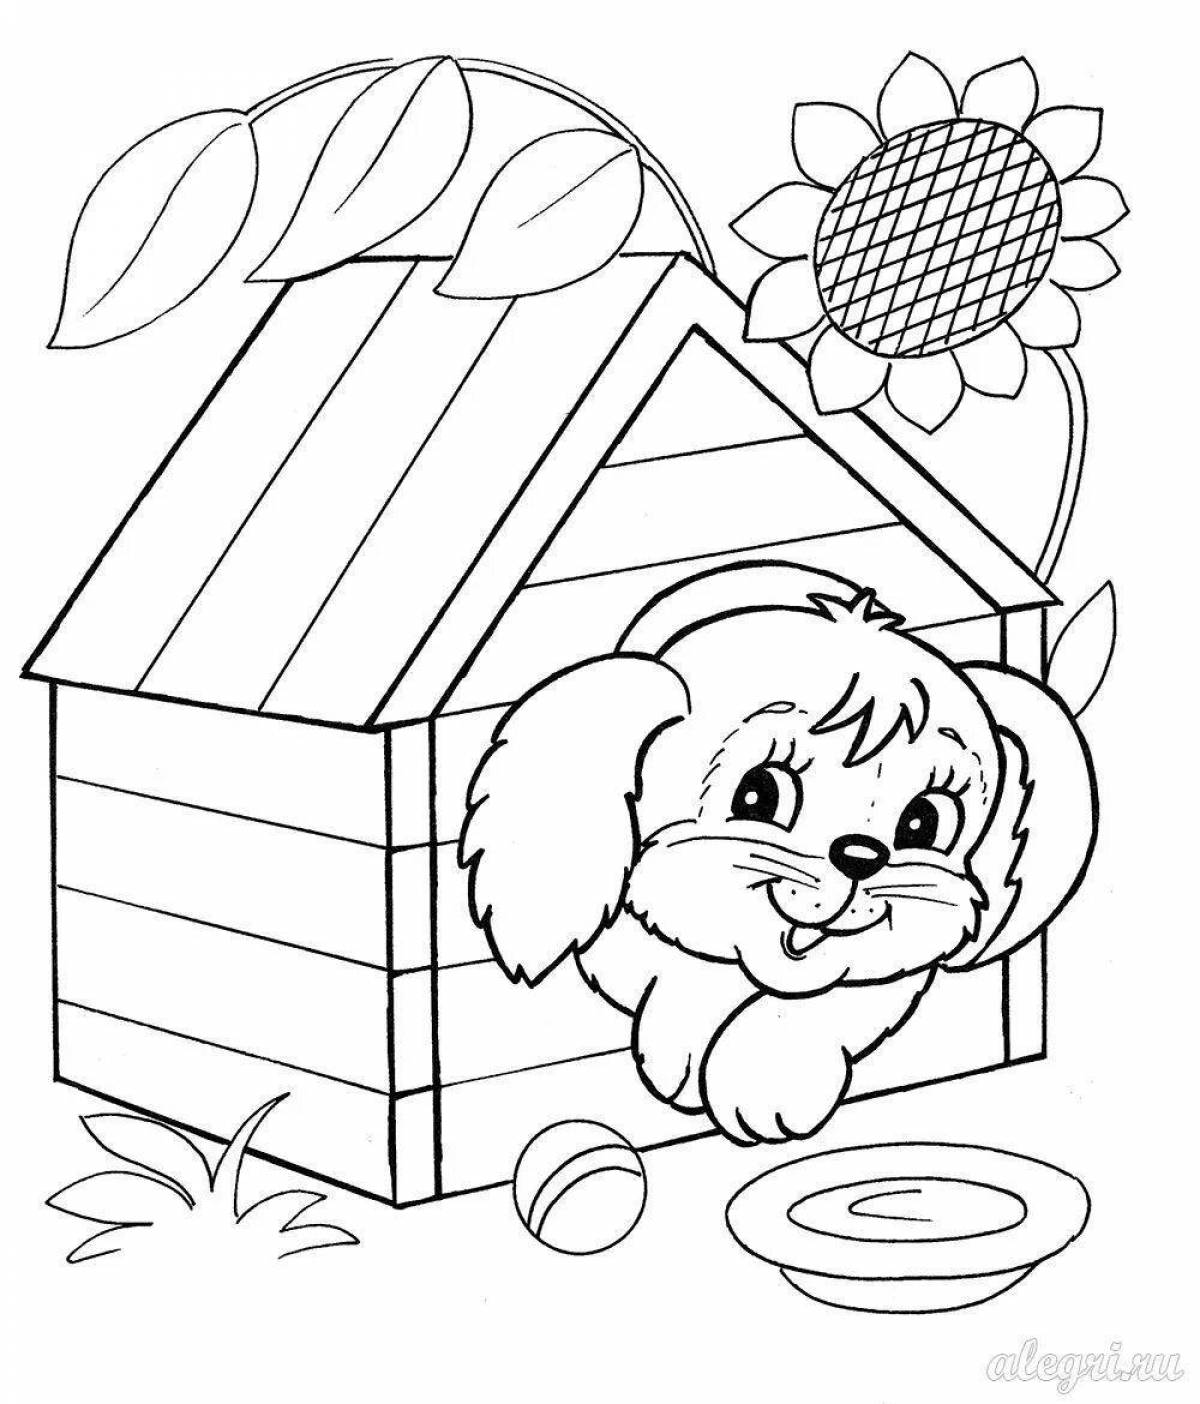 Coloring page magic dog house